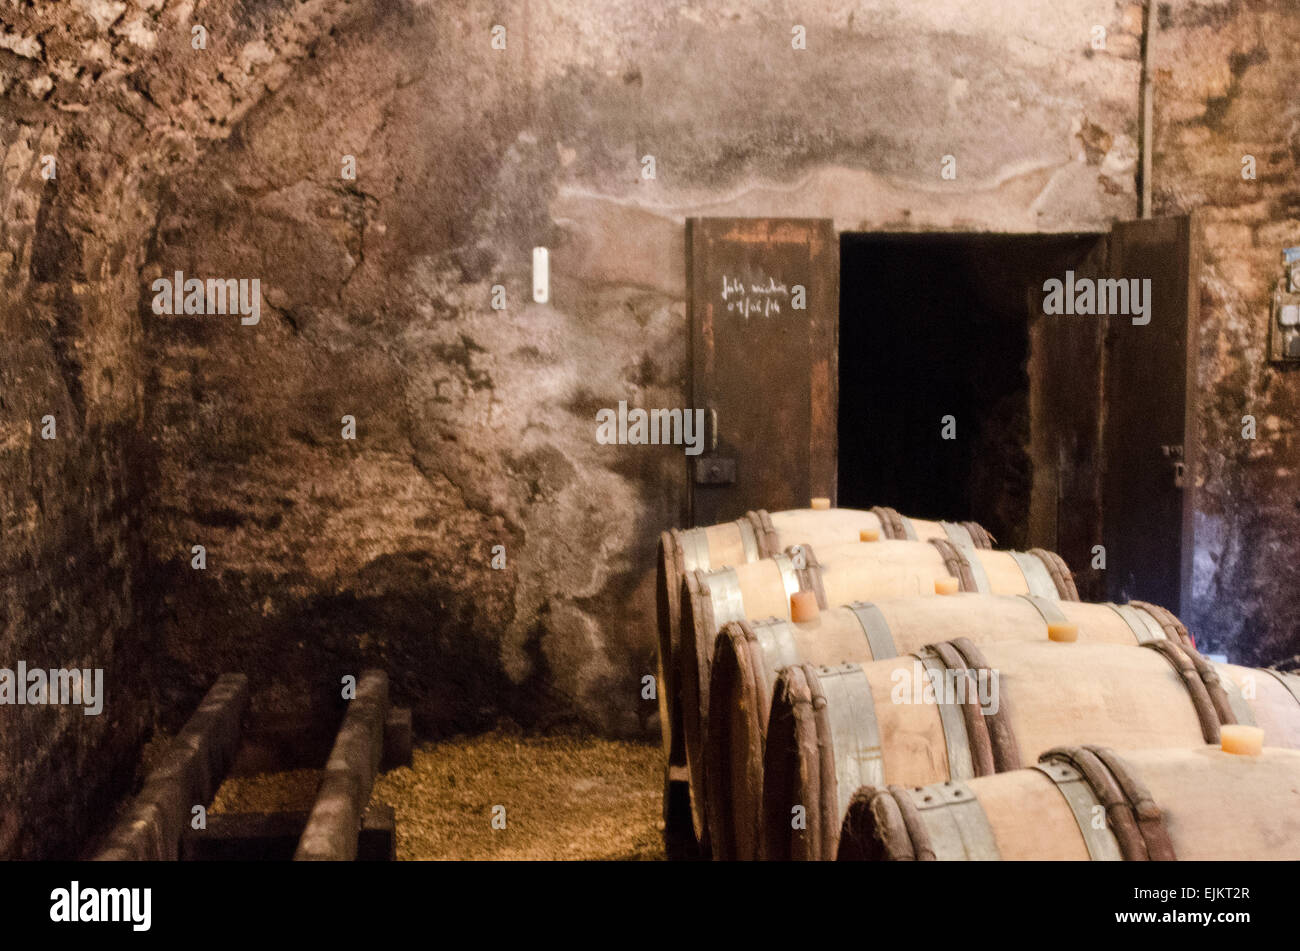 Casks of wine stored in the cellars of Domaine de la Folie, a vineyard near Chagny in the Côte Chalonnaise of Burgundy, France. Stock Photo